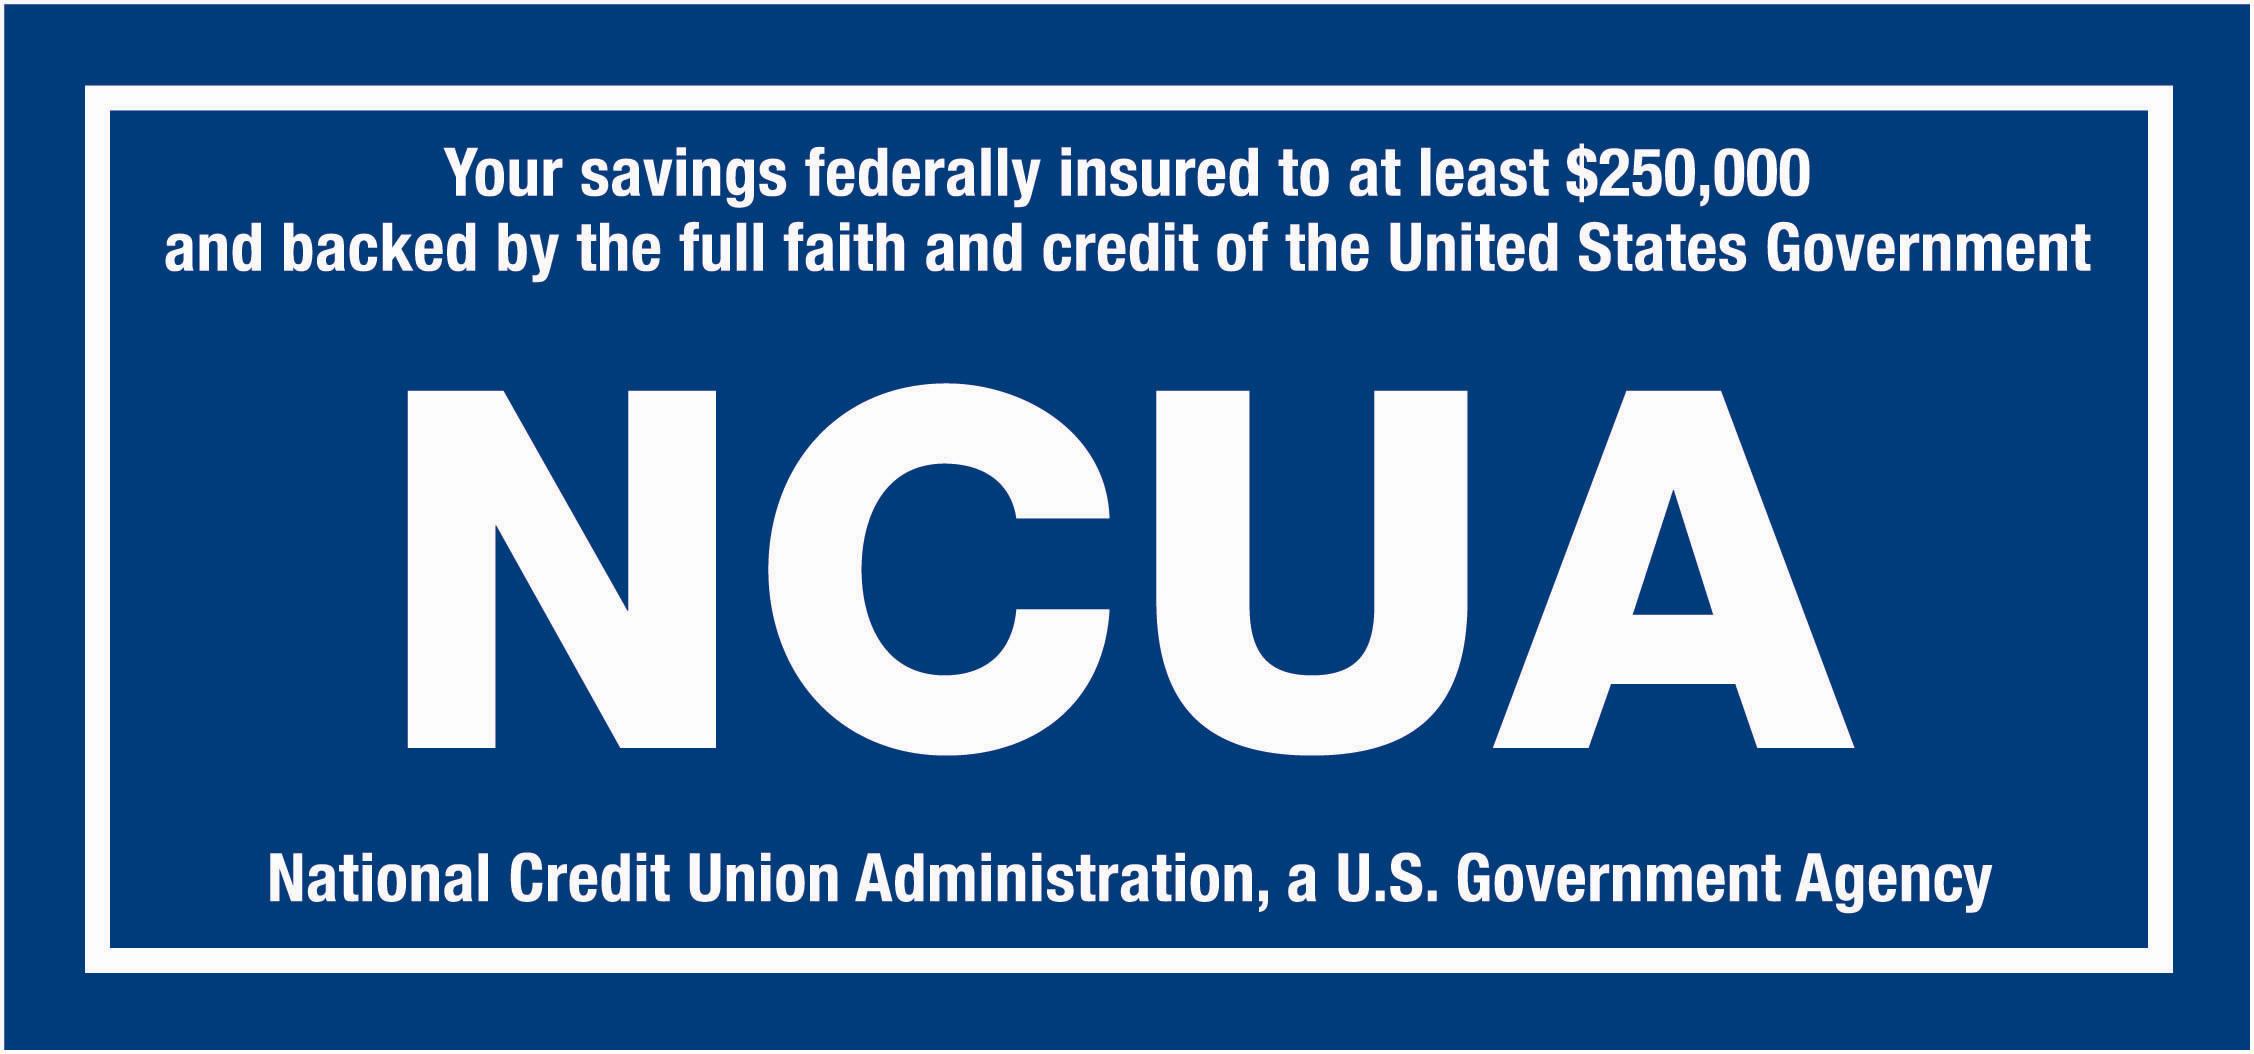 Your savings federally insured to at least $250,000 and backed by the full faith and credit of the United States Government.  NUCA - National Credit Union Administration, a U.S. Government Agency.